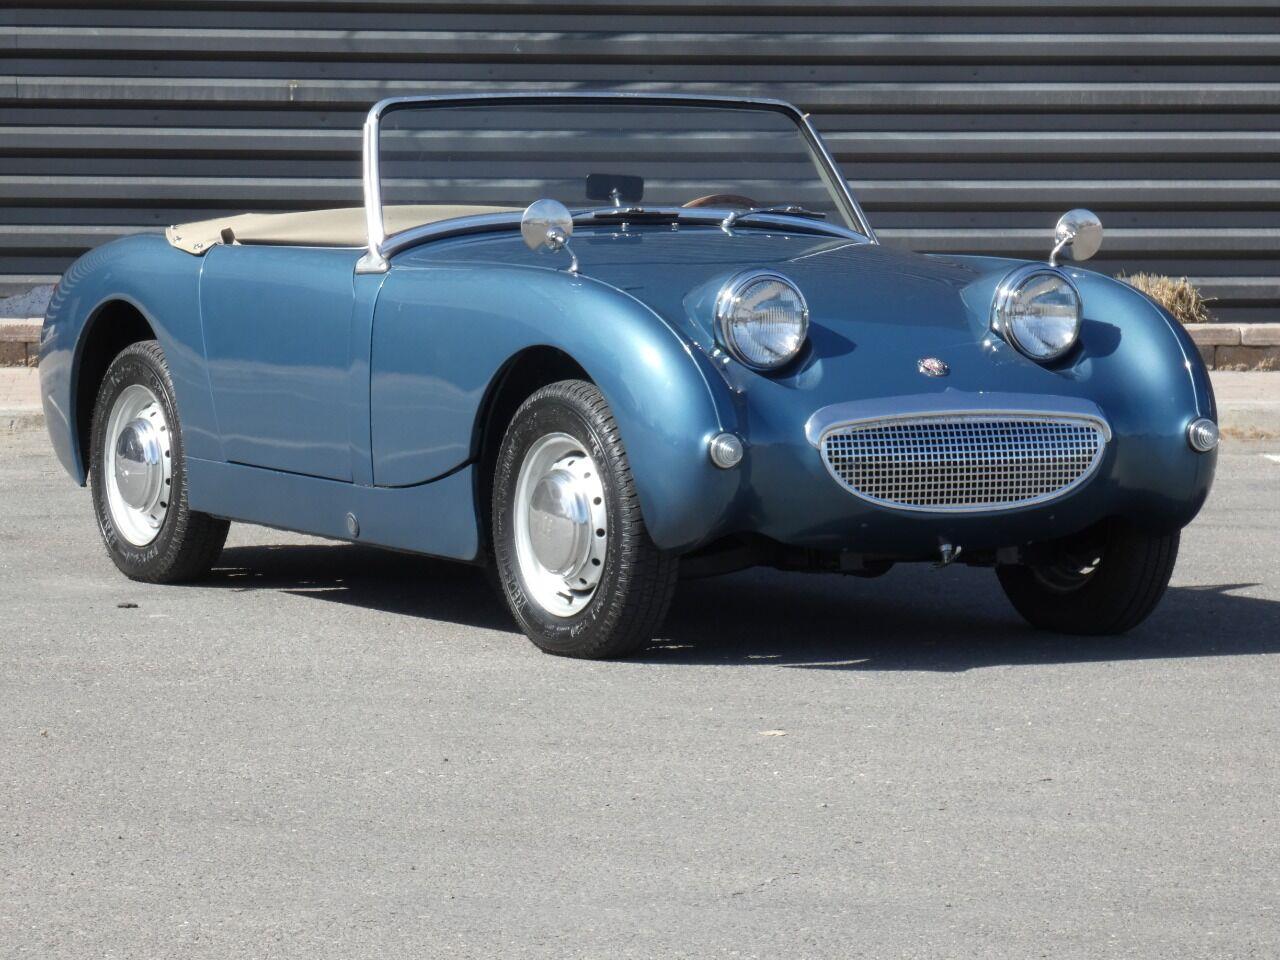 1960 Austin-Healey Sprite for sale in Hailey, ID